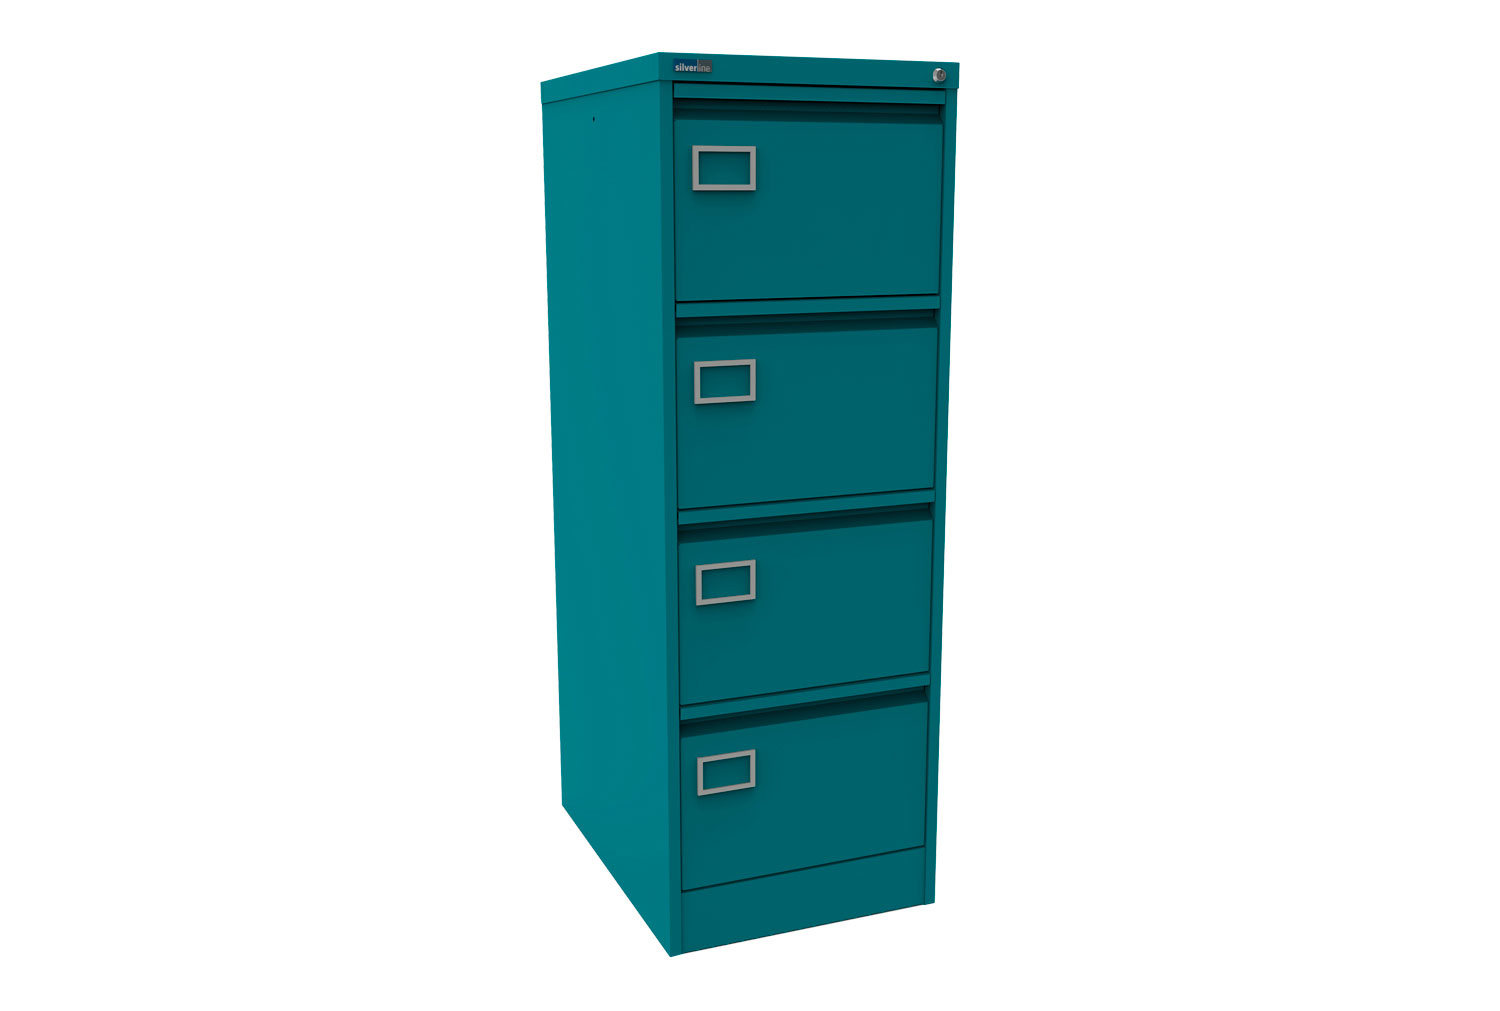 Silverline Executive 4 Drawer Filing Cabinets, 4 Drawer - 40wx62dx132h (cm), Verdi, Fully Installed